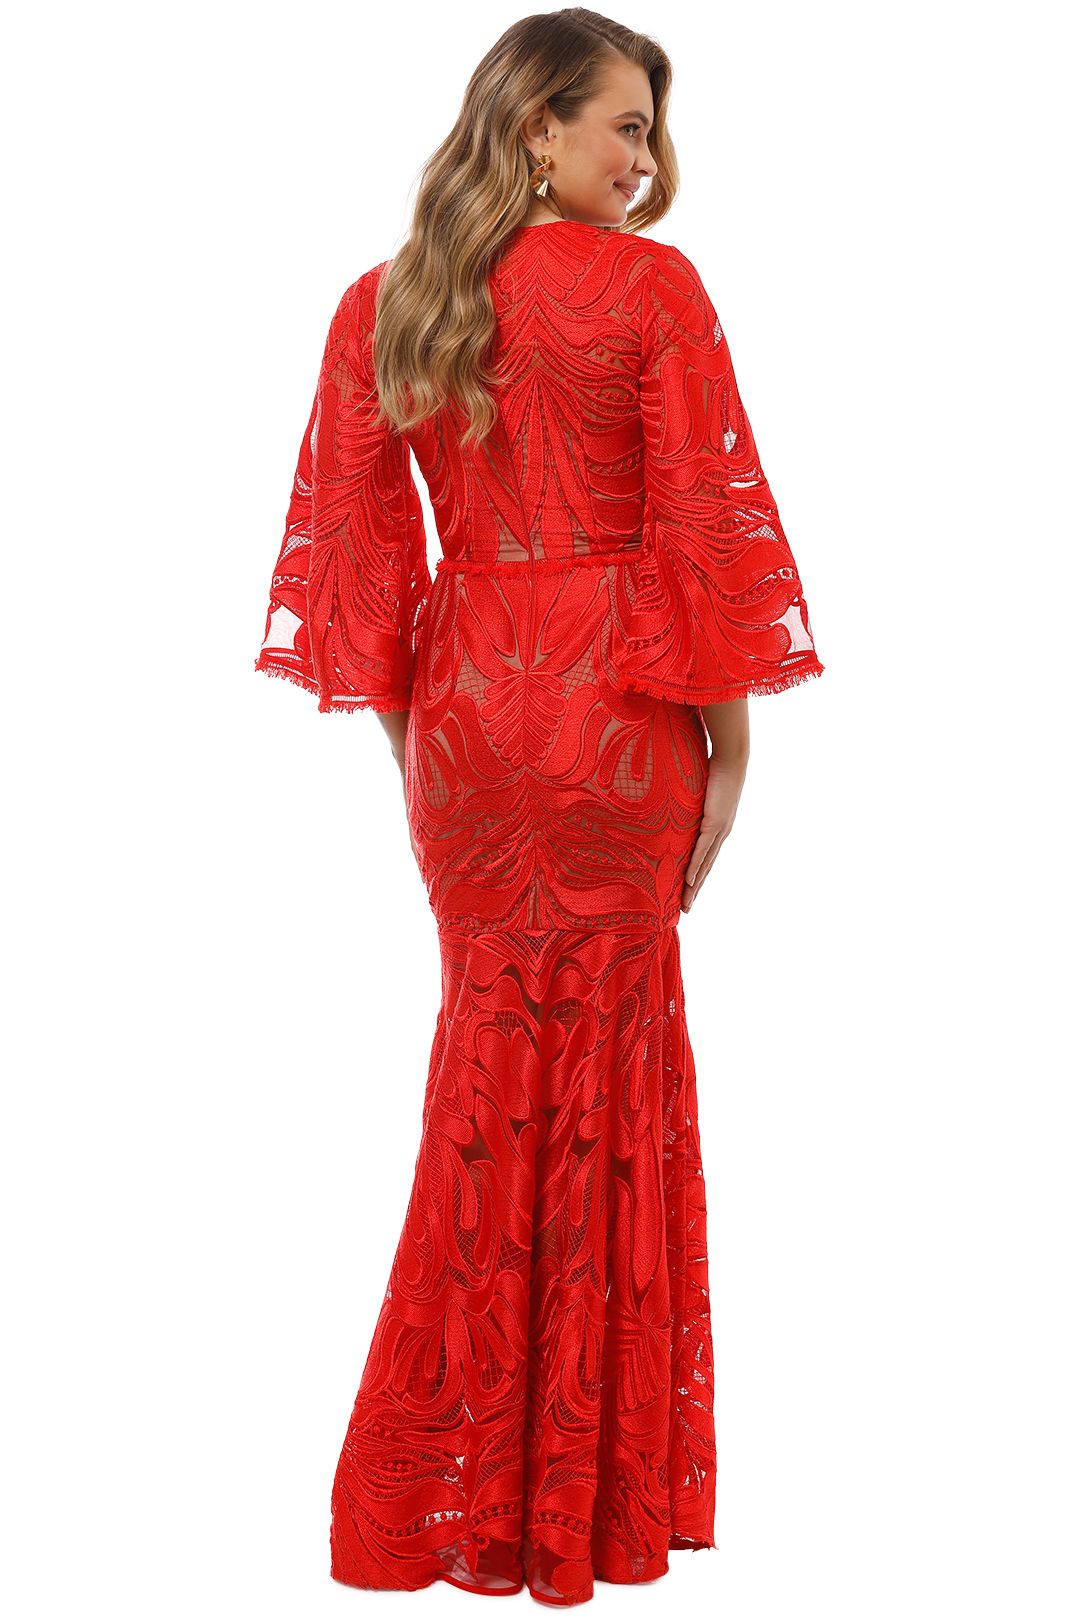 Talulah - Carnation Flared Sleeve Gown - Red - Back